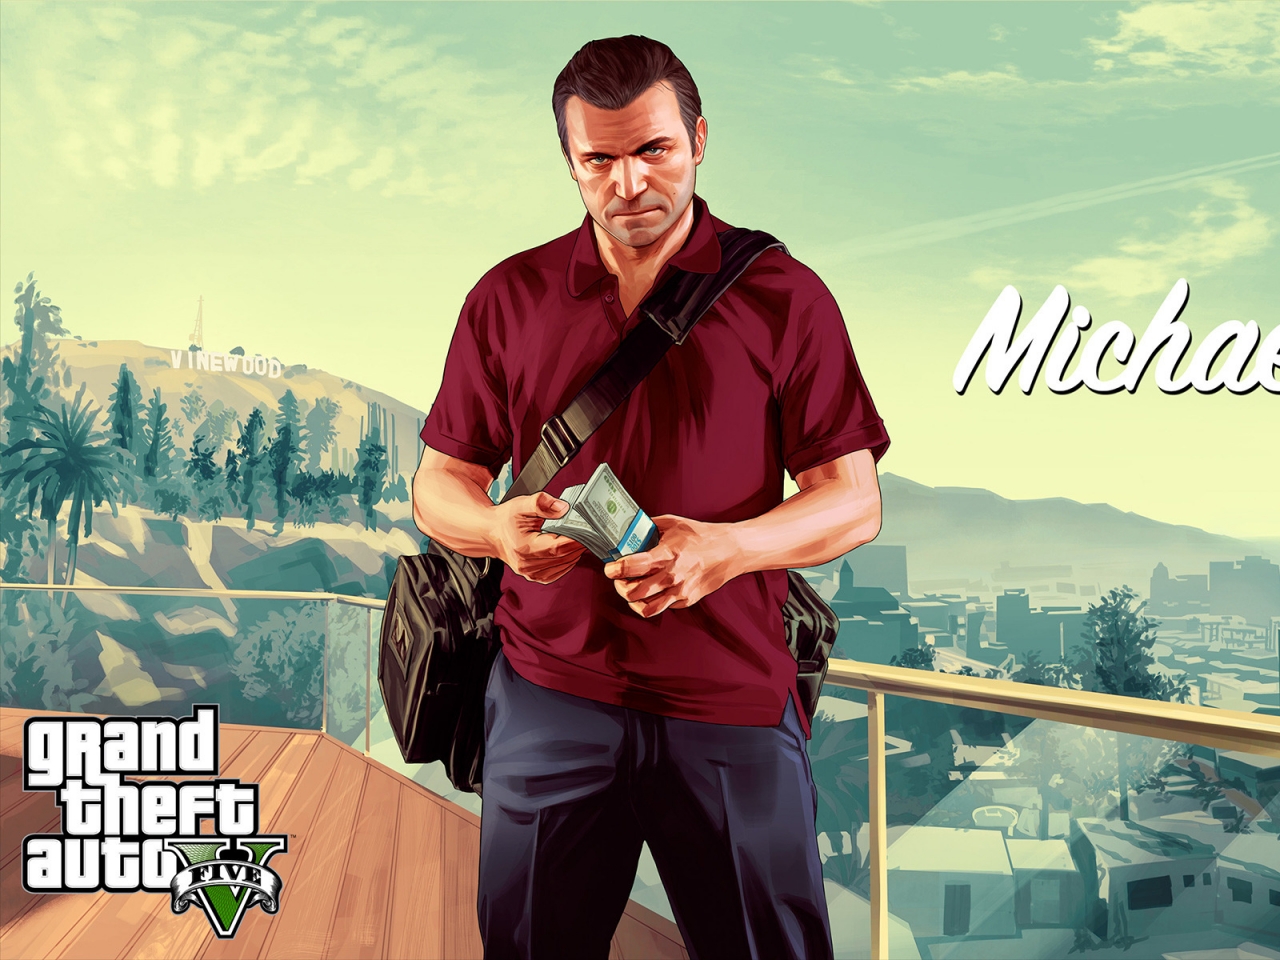 Michael with Money GTA V for 1280 x 960 resolution